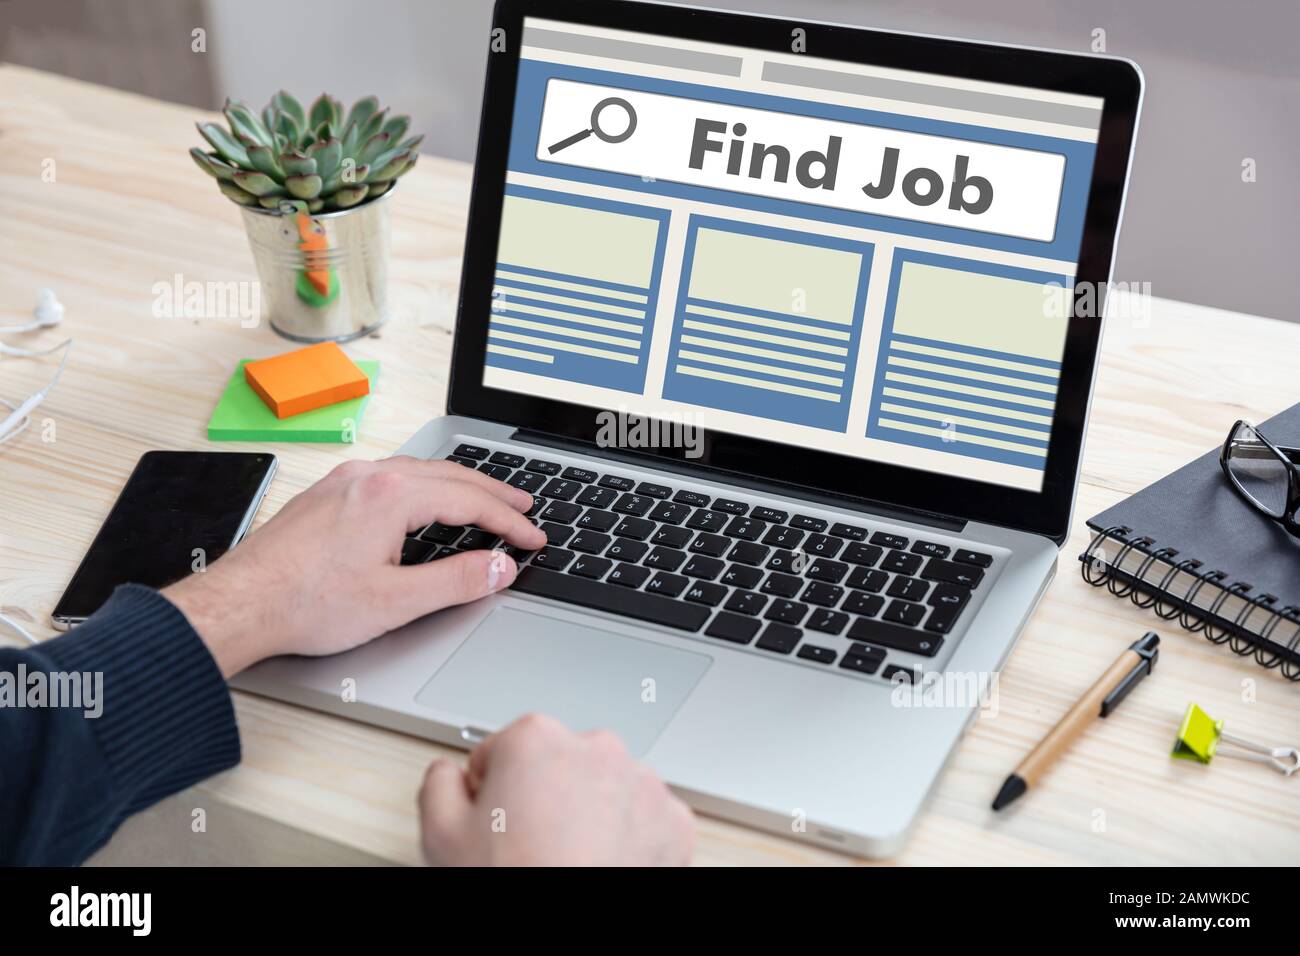 Job search online concept. Man working with a computer laptop, find job text on the screen, office business background. Stock Photo